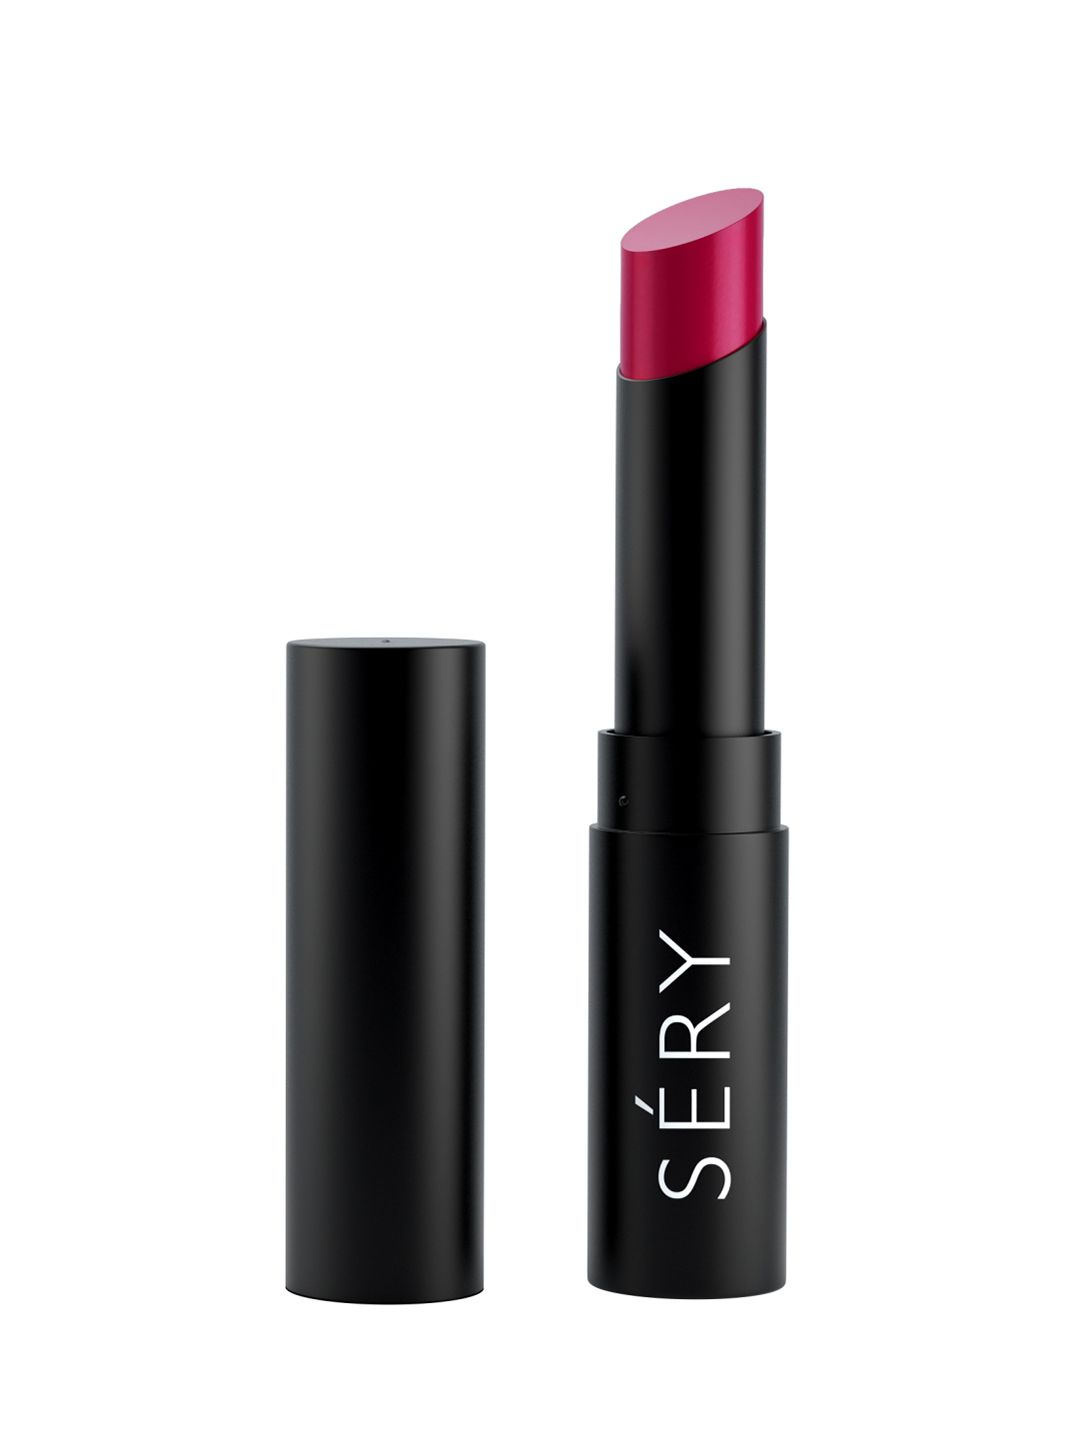 SERY Say Cheeez Creamy Matte Lip Color - Pink Pout CL09 Price in India